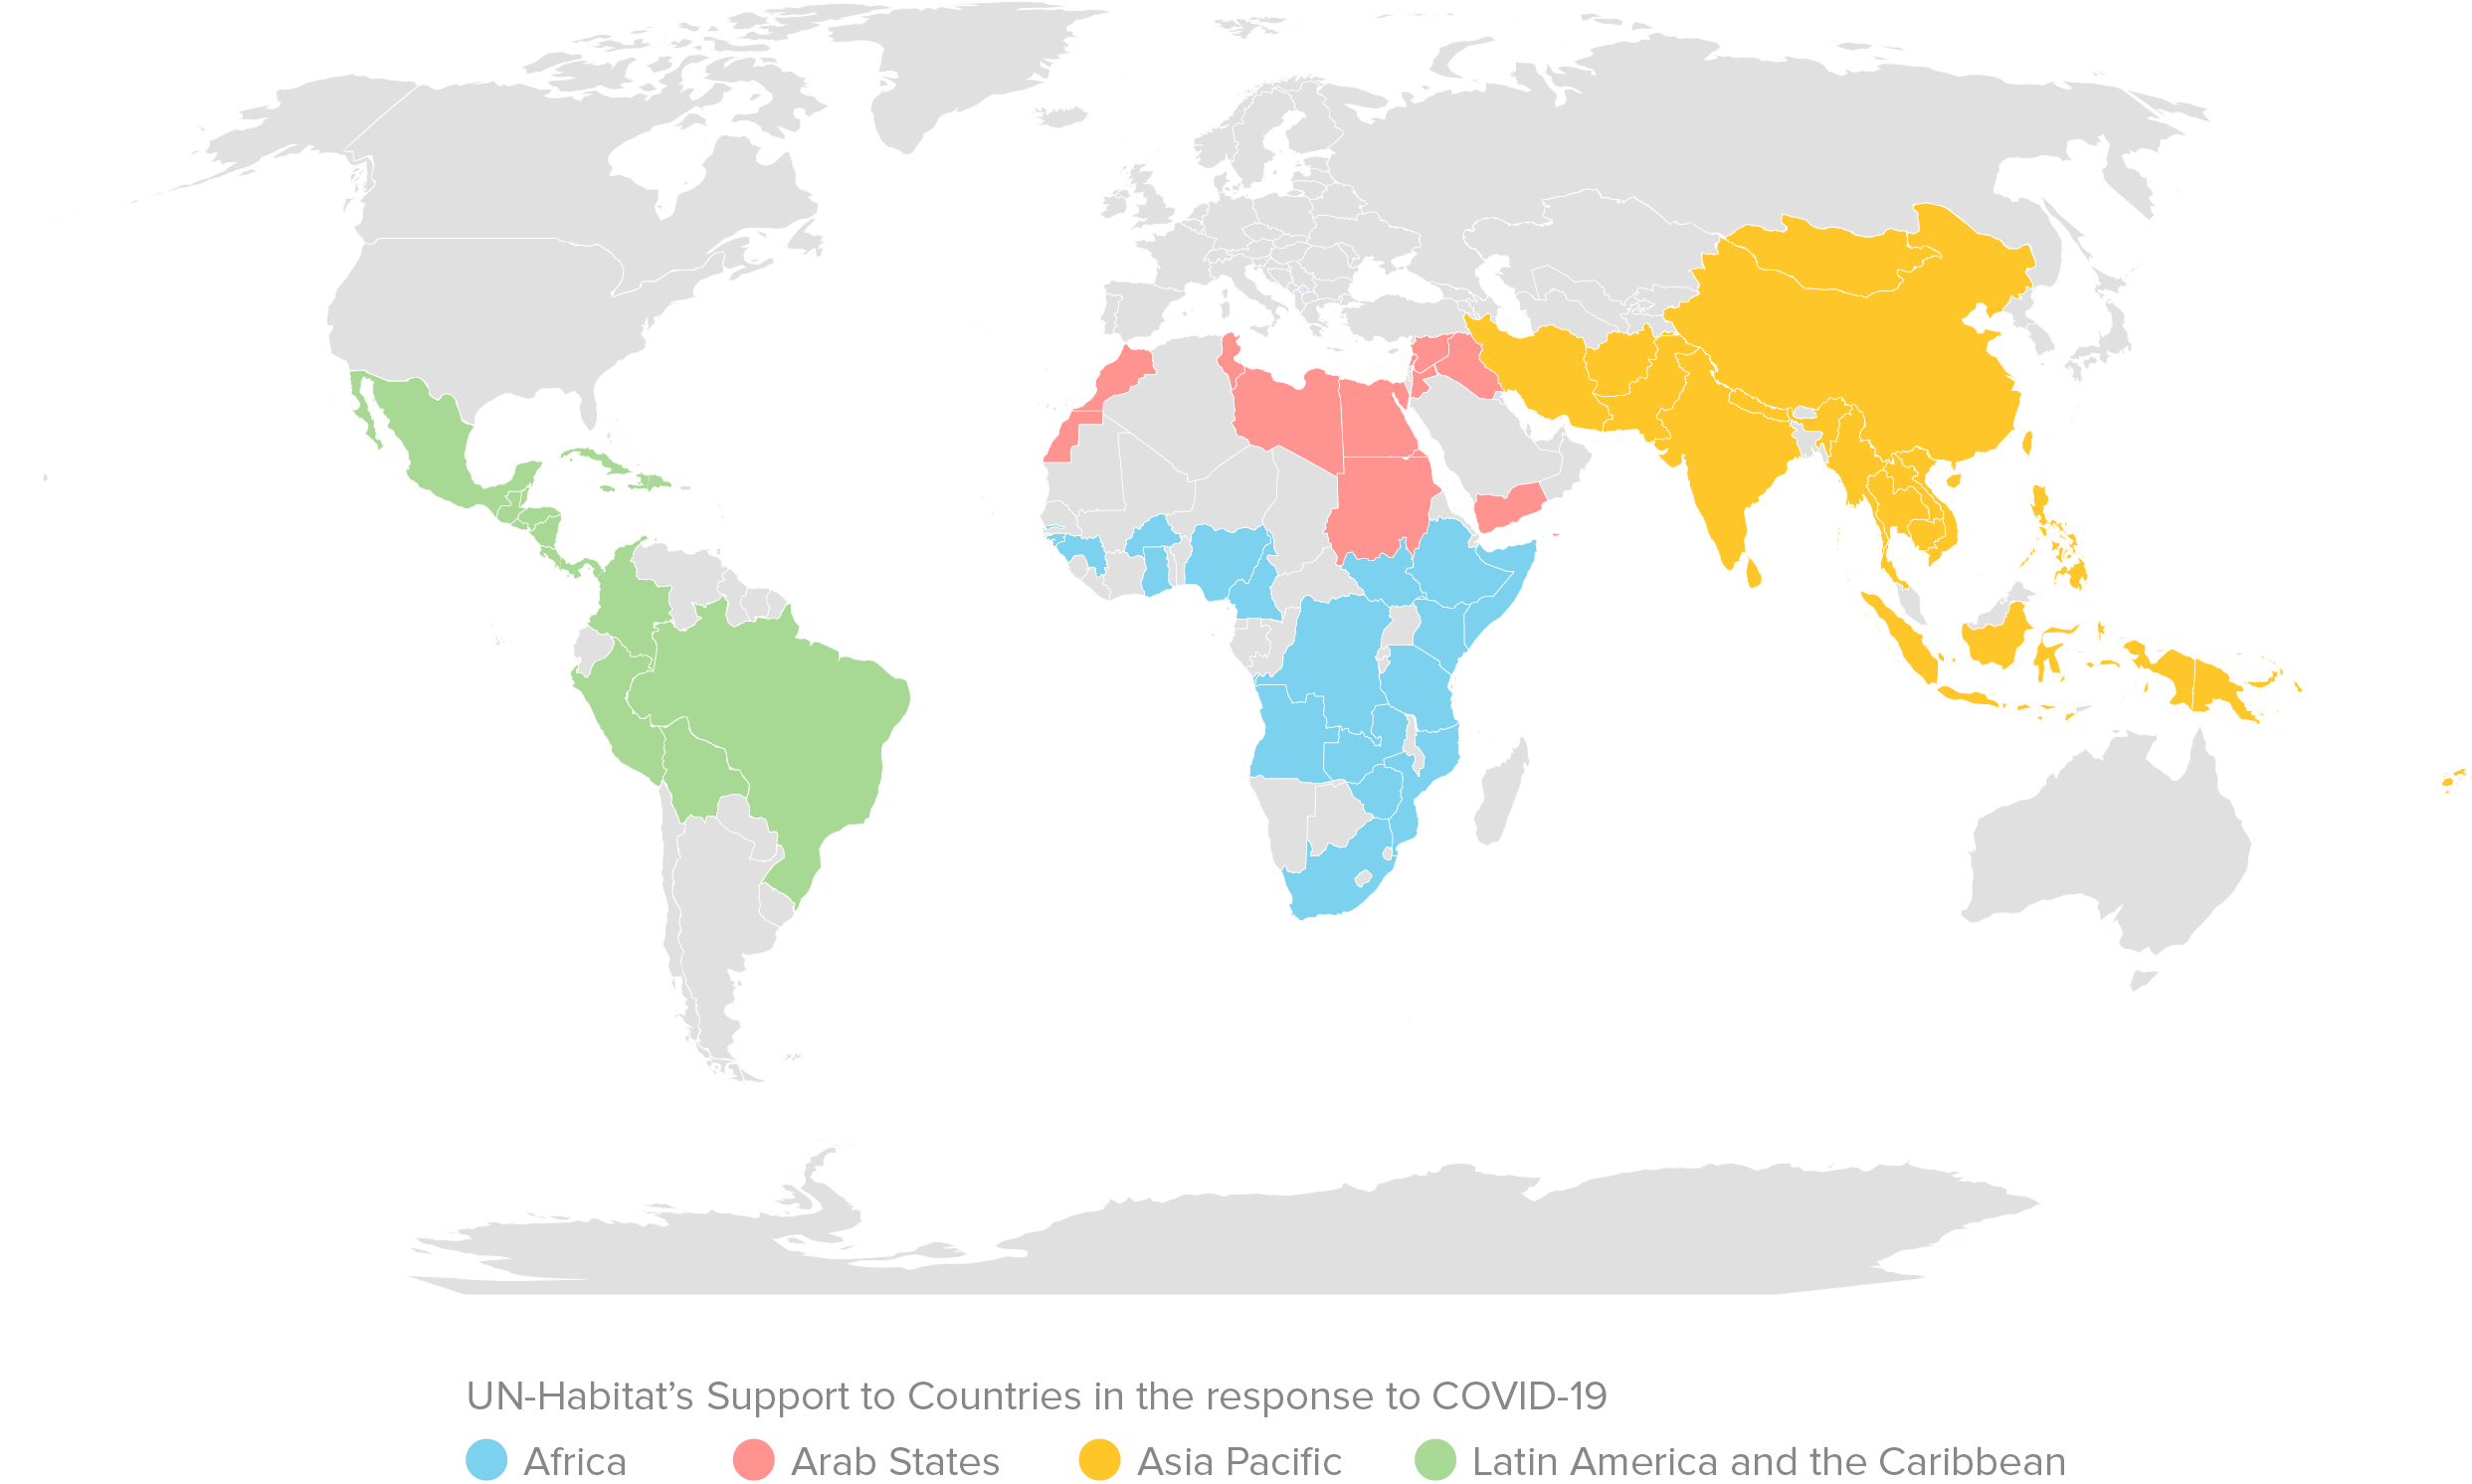 Countries of Action